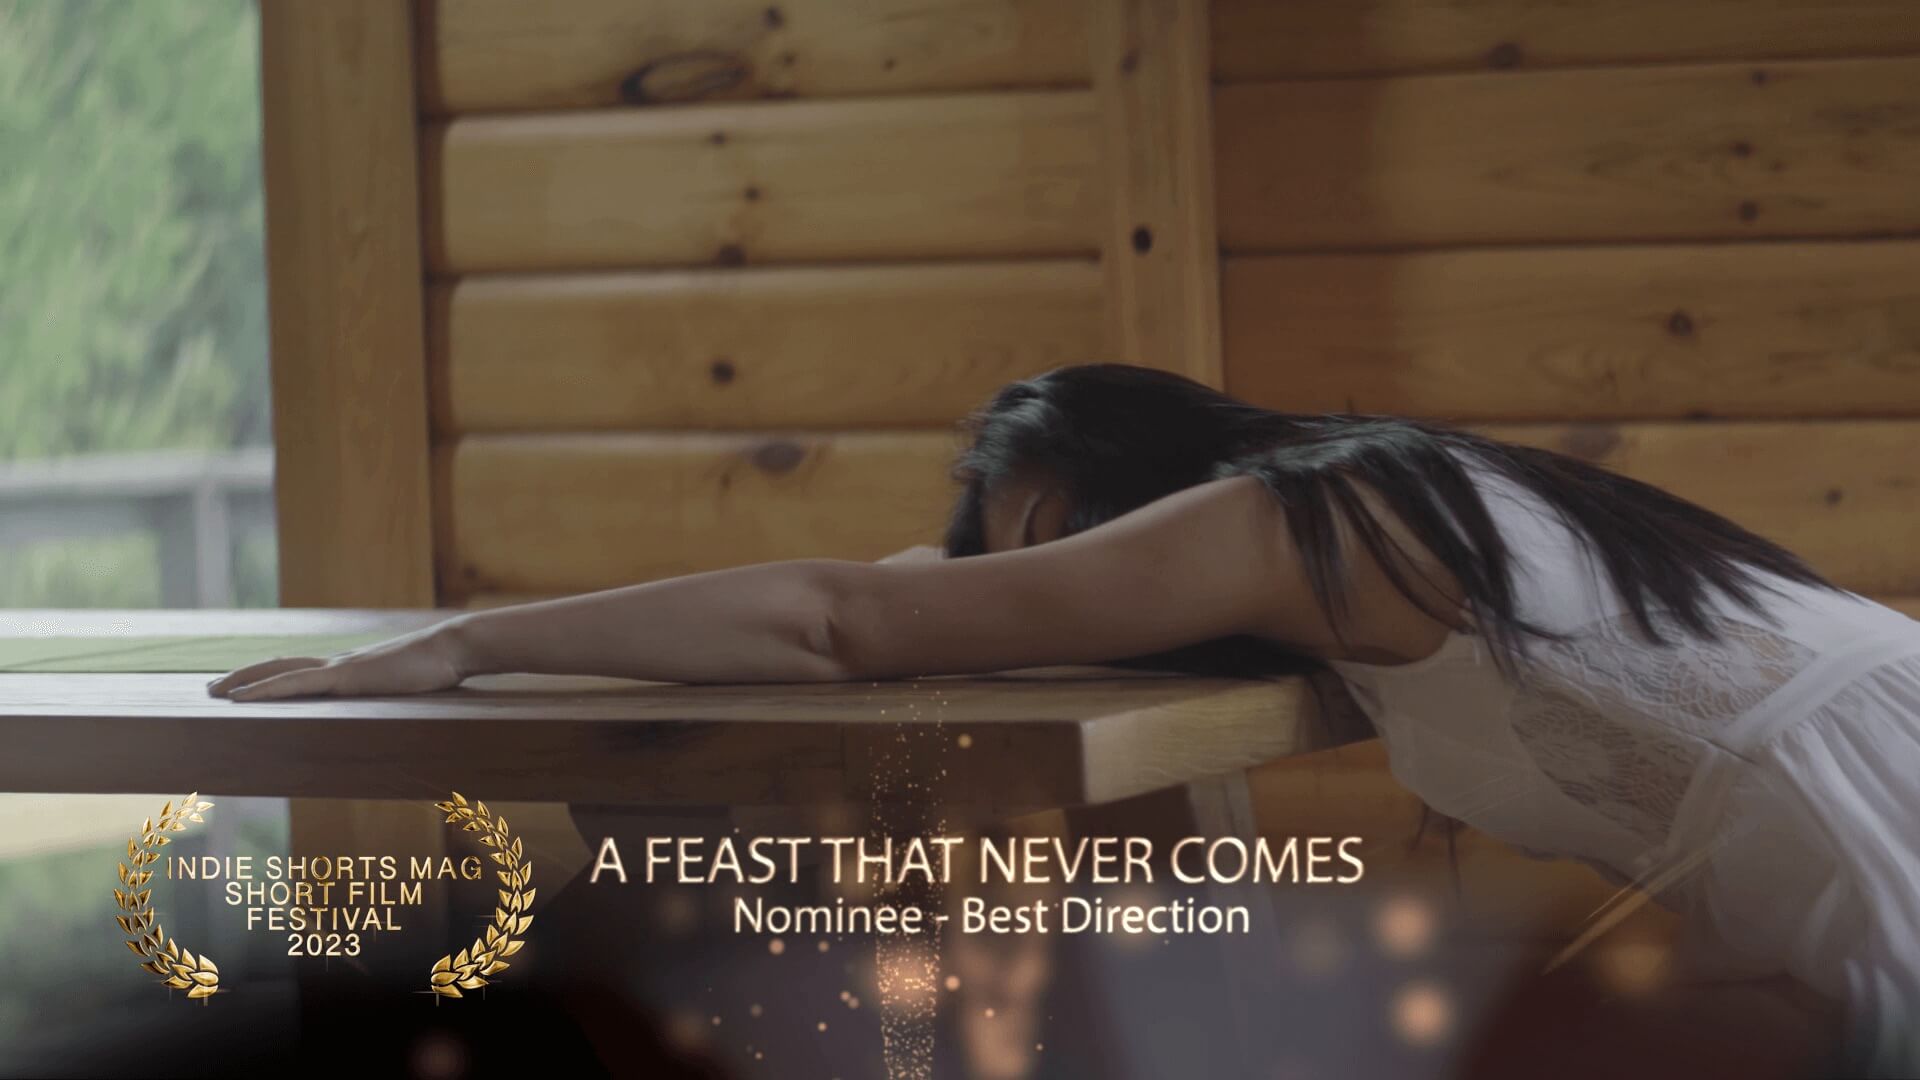 Indie Shorts Mag Short Film Festival - Best Direction - Nominee - A Feast That Never Comes